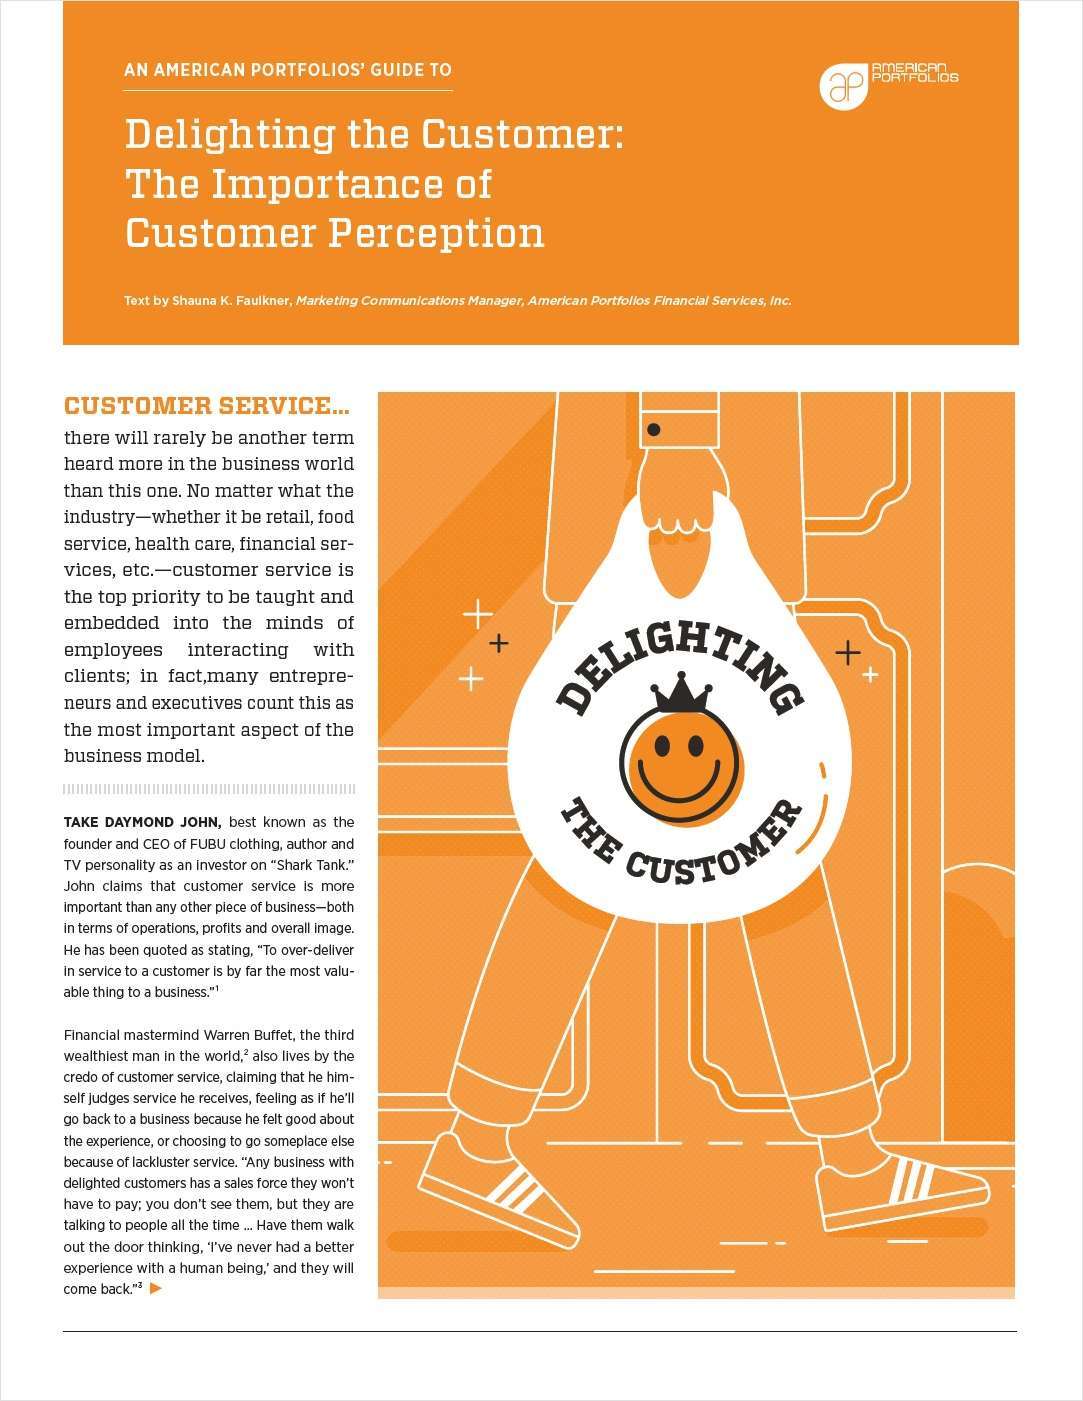 Delighting the Customer: The Importance of Customer Perception